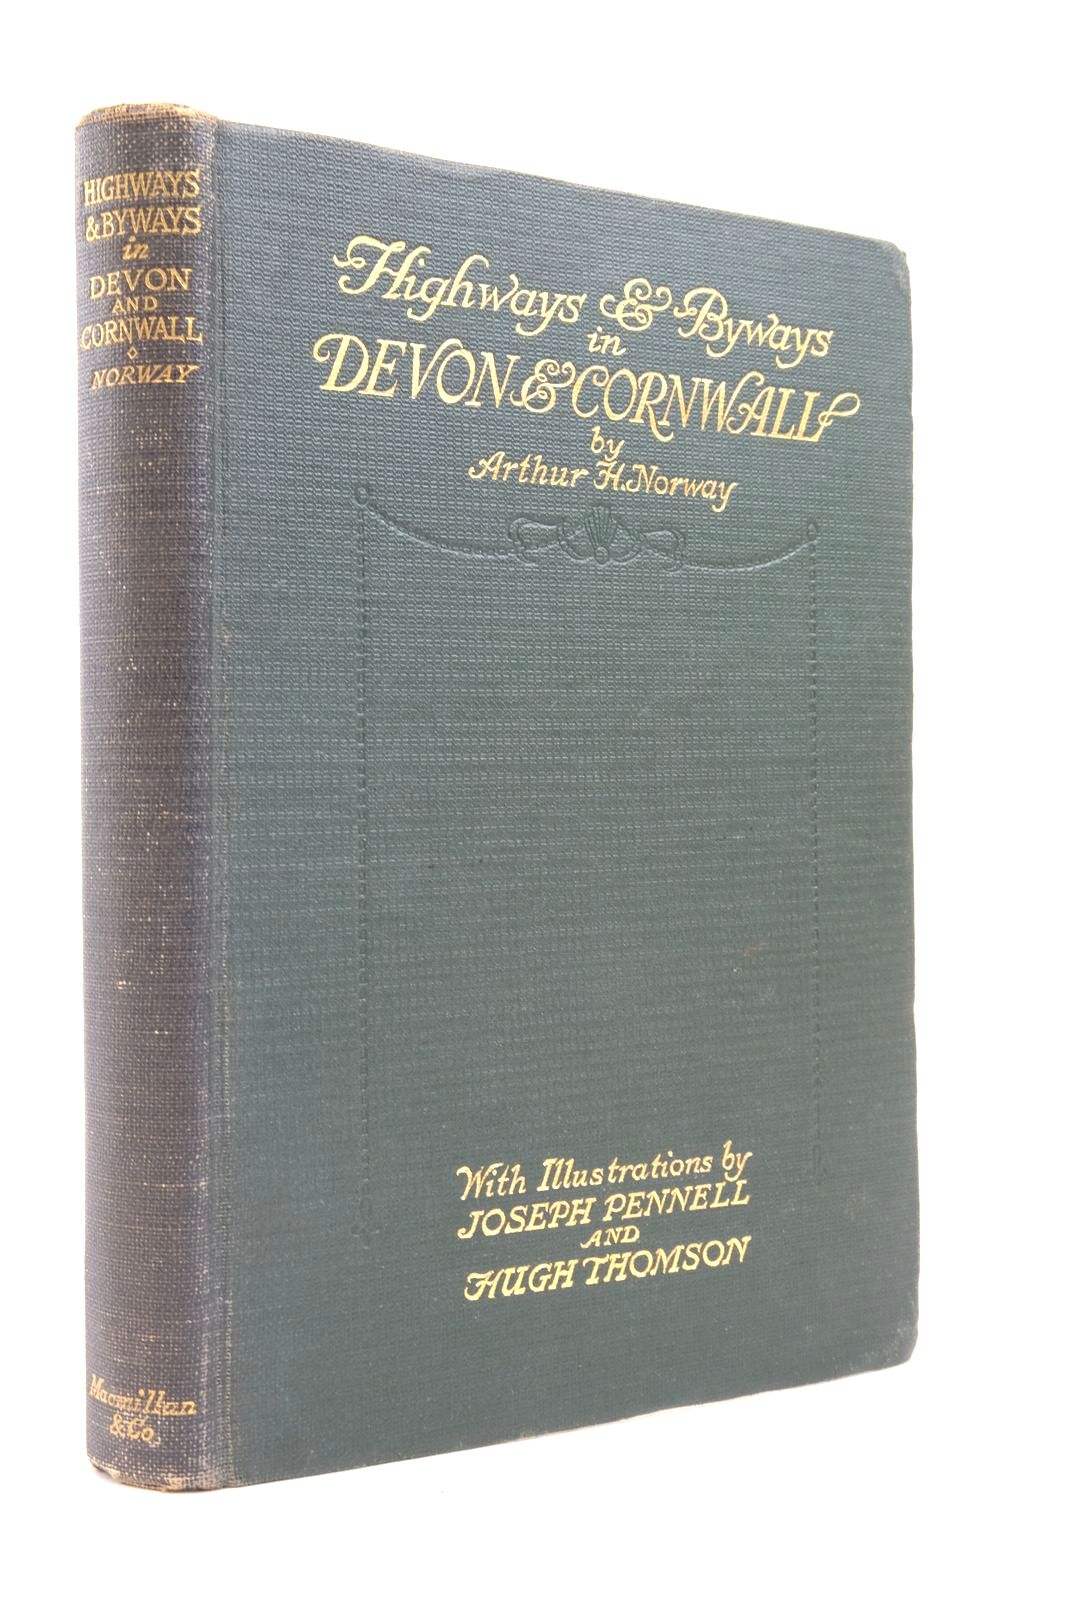 Photo of HIGHWAYS AND BYWAYS IN DEVON AND CORNWALL written by Norway, Arthur H. illustrated by Pennell, Joseph
Thomson, Hugh published by Macmillan & Co. Ltd. (STOCK CODE: 2137630)  for sale by Stella & Rose's Books